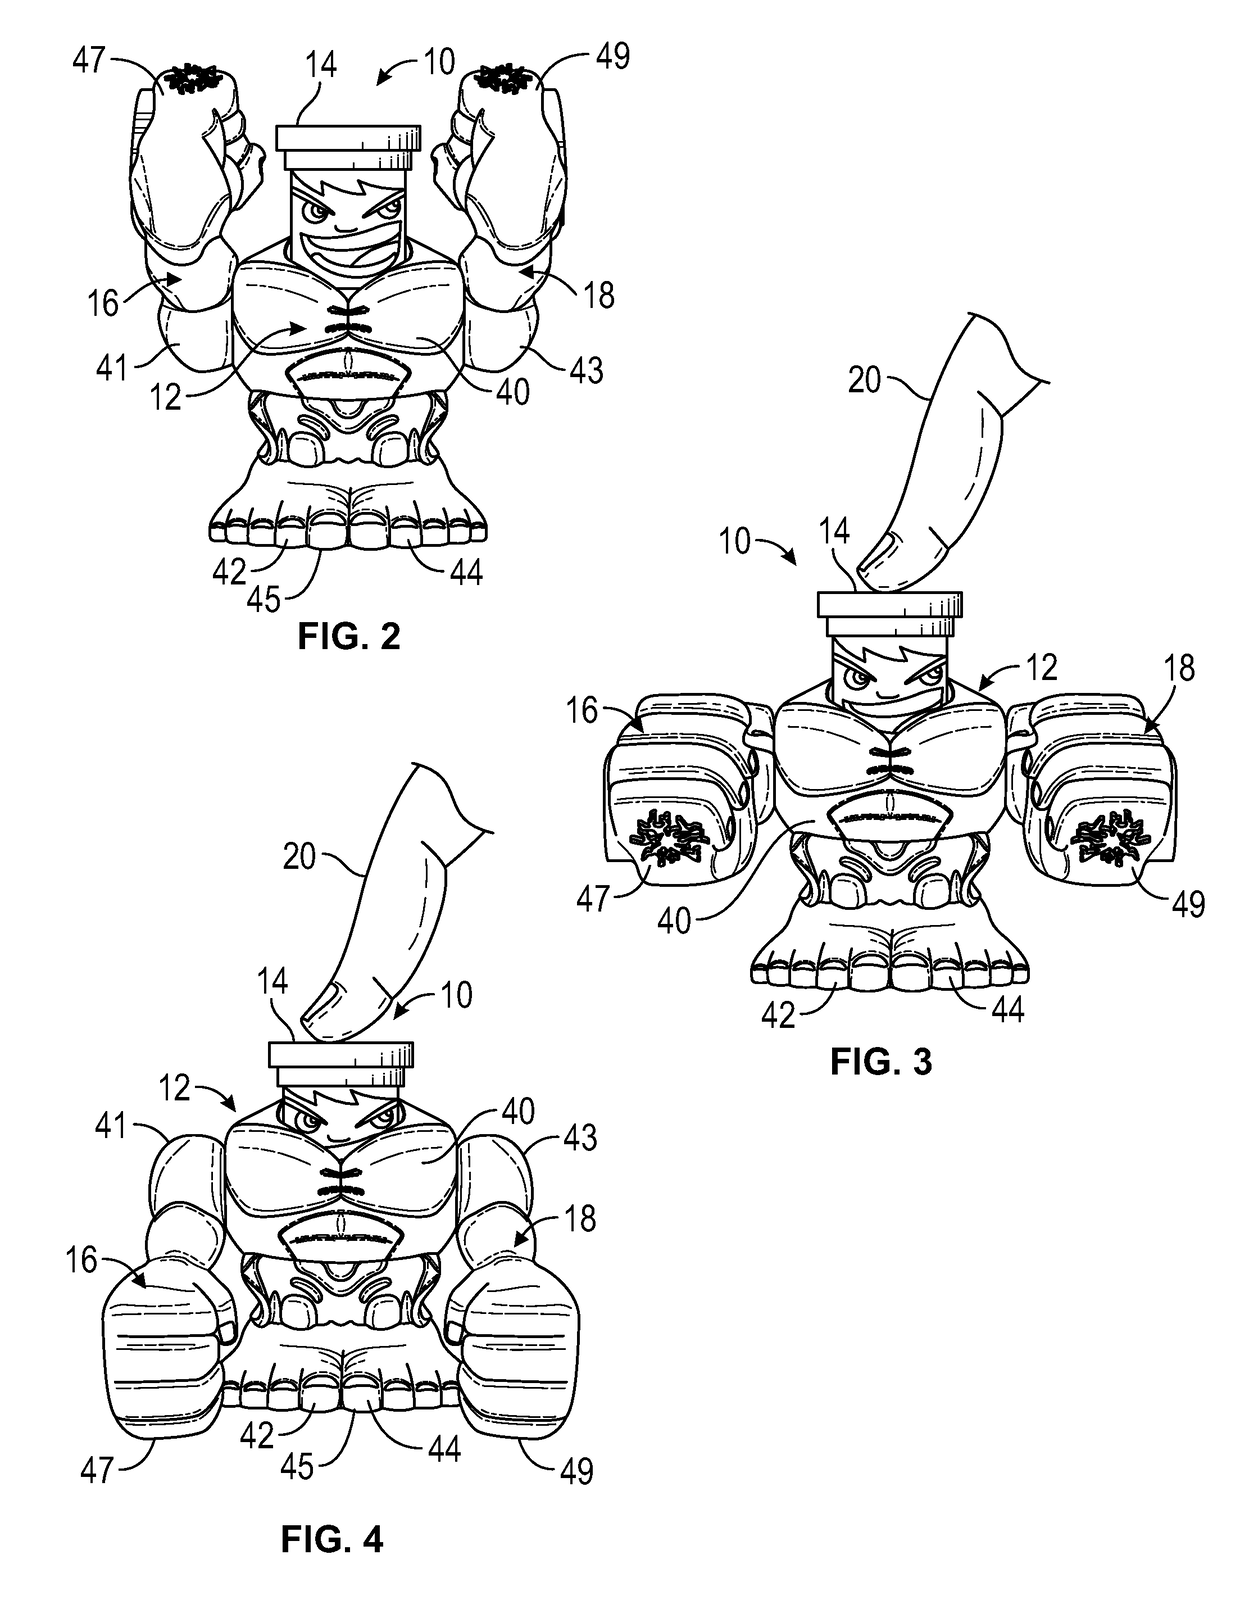 Play apparatus and methods featuring modeling compound can actuating toy items